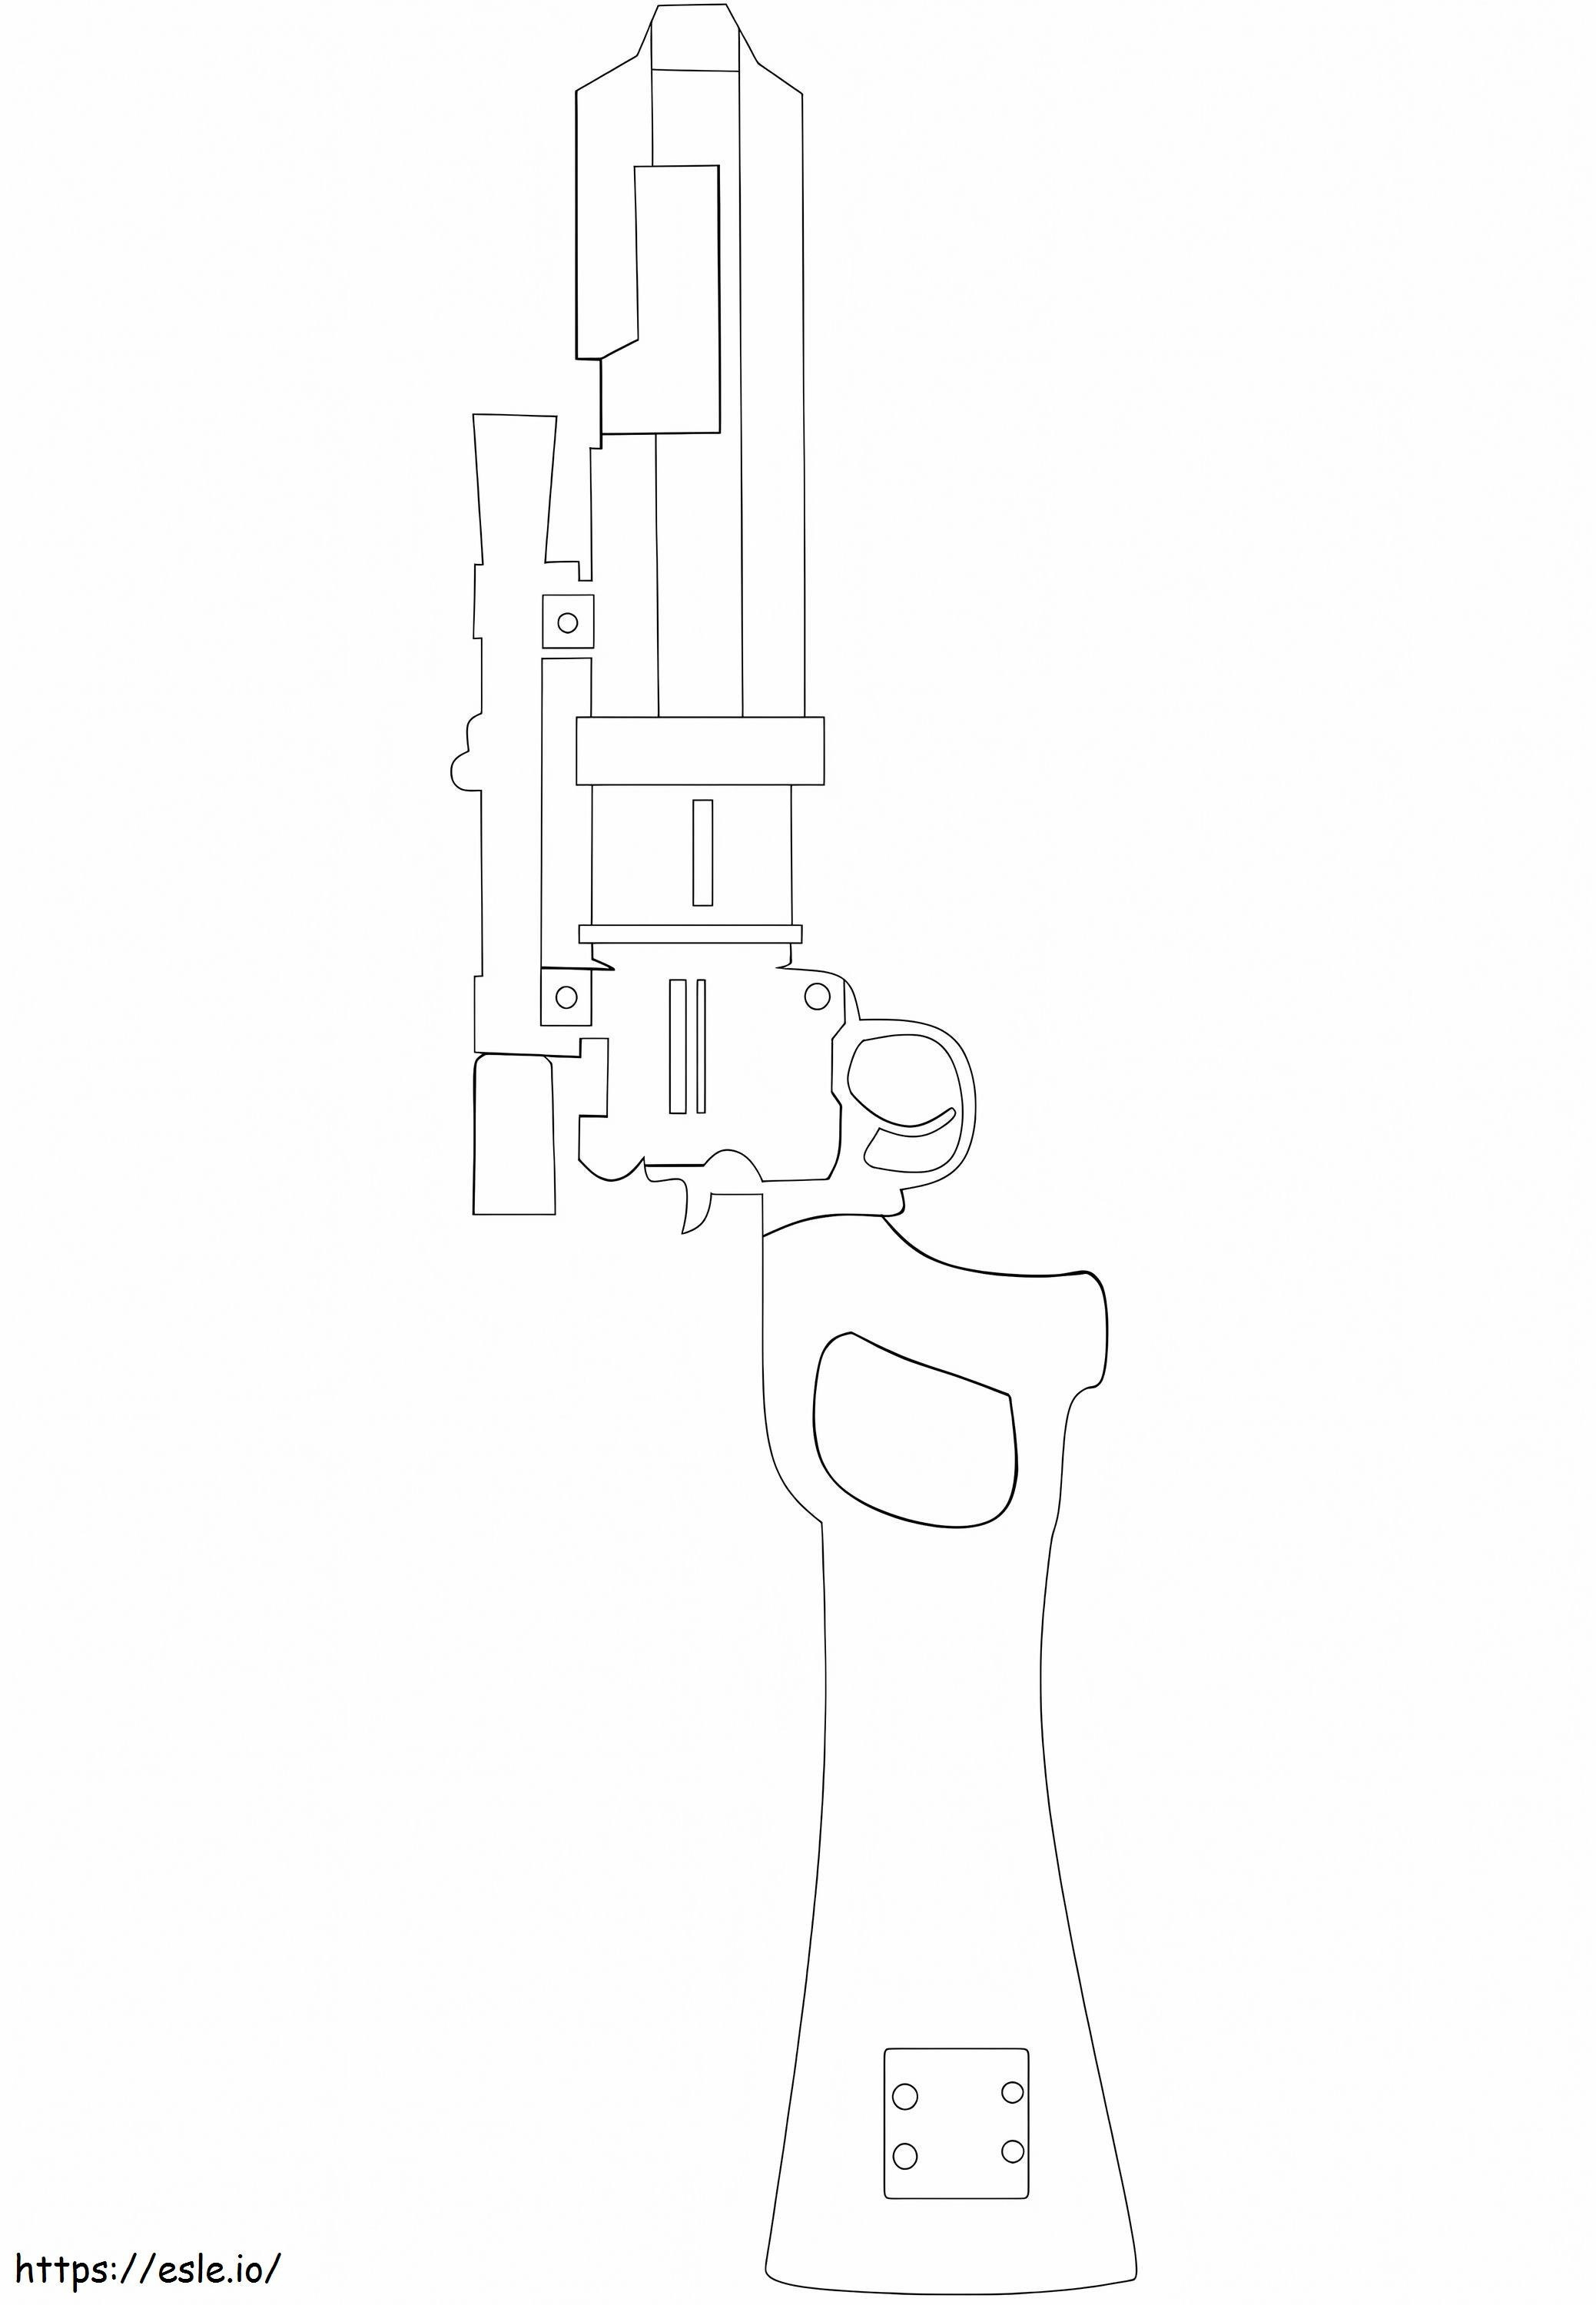 1563154355 Ee 3 Carbine Rifle A4 coloring page